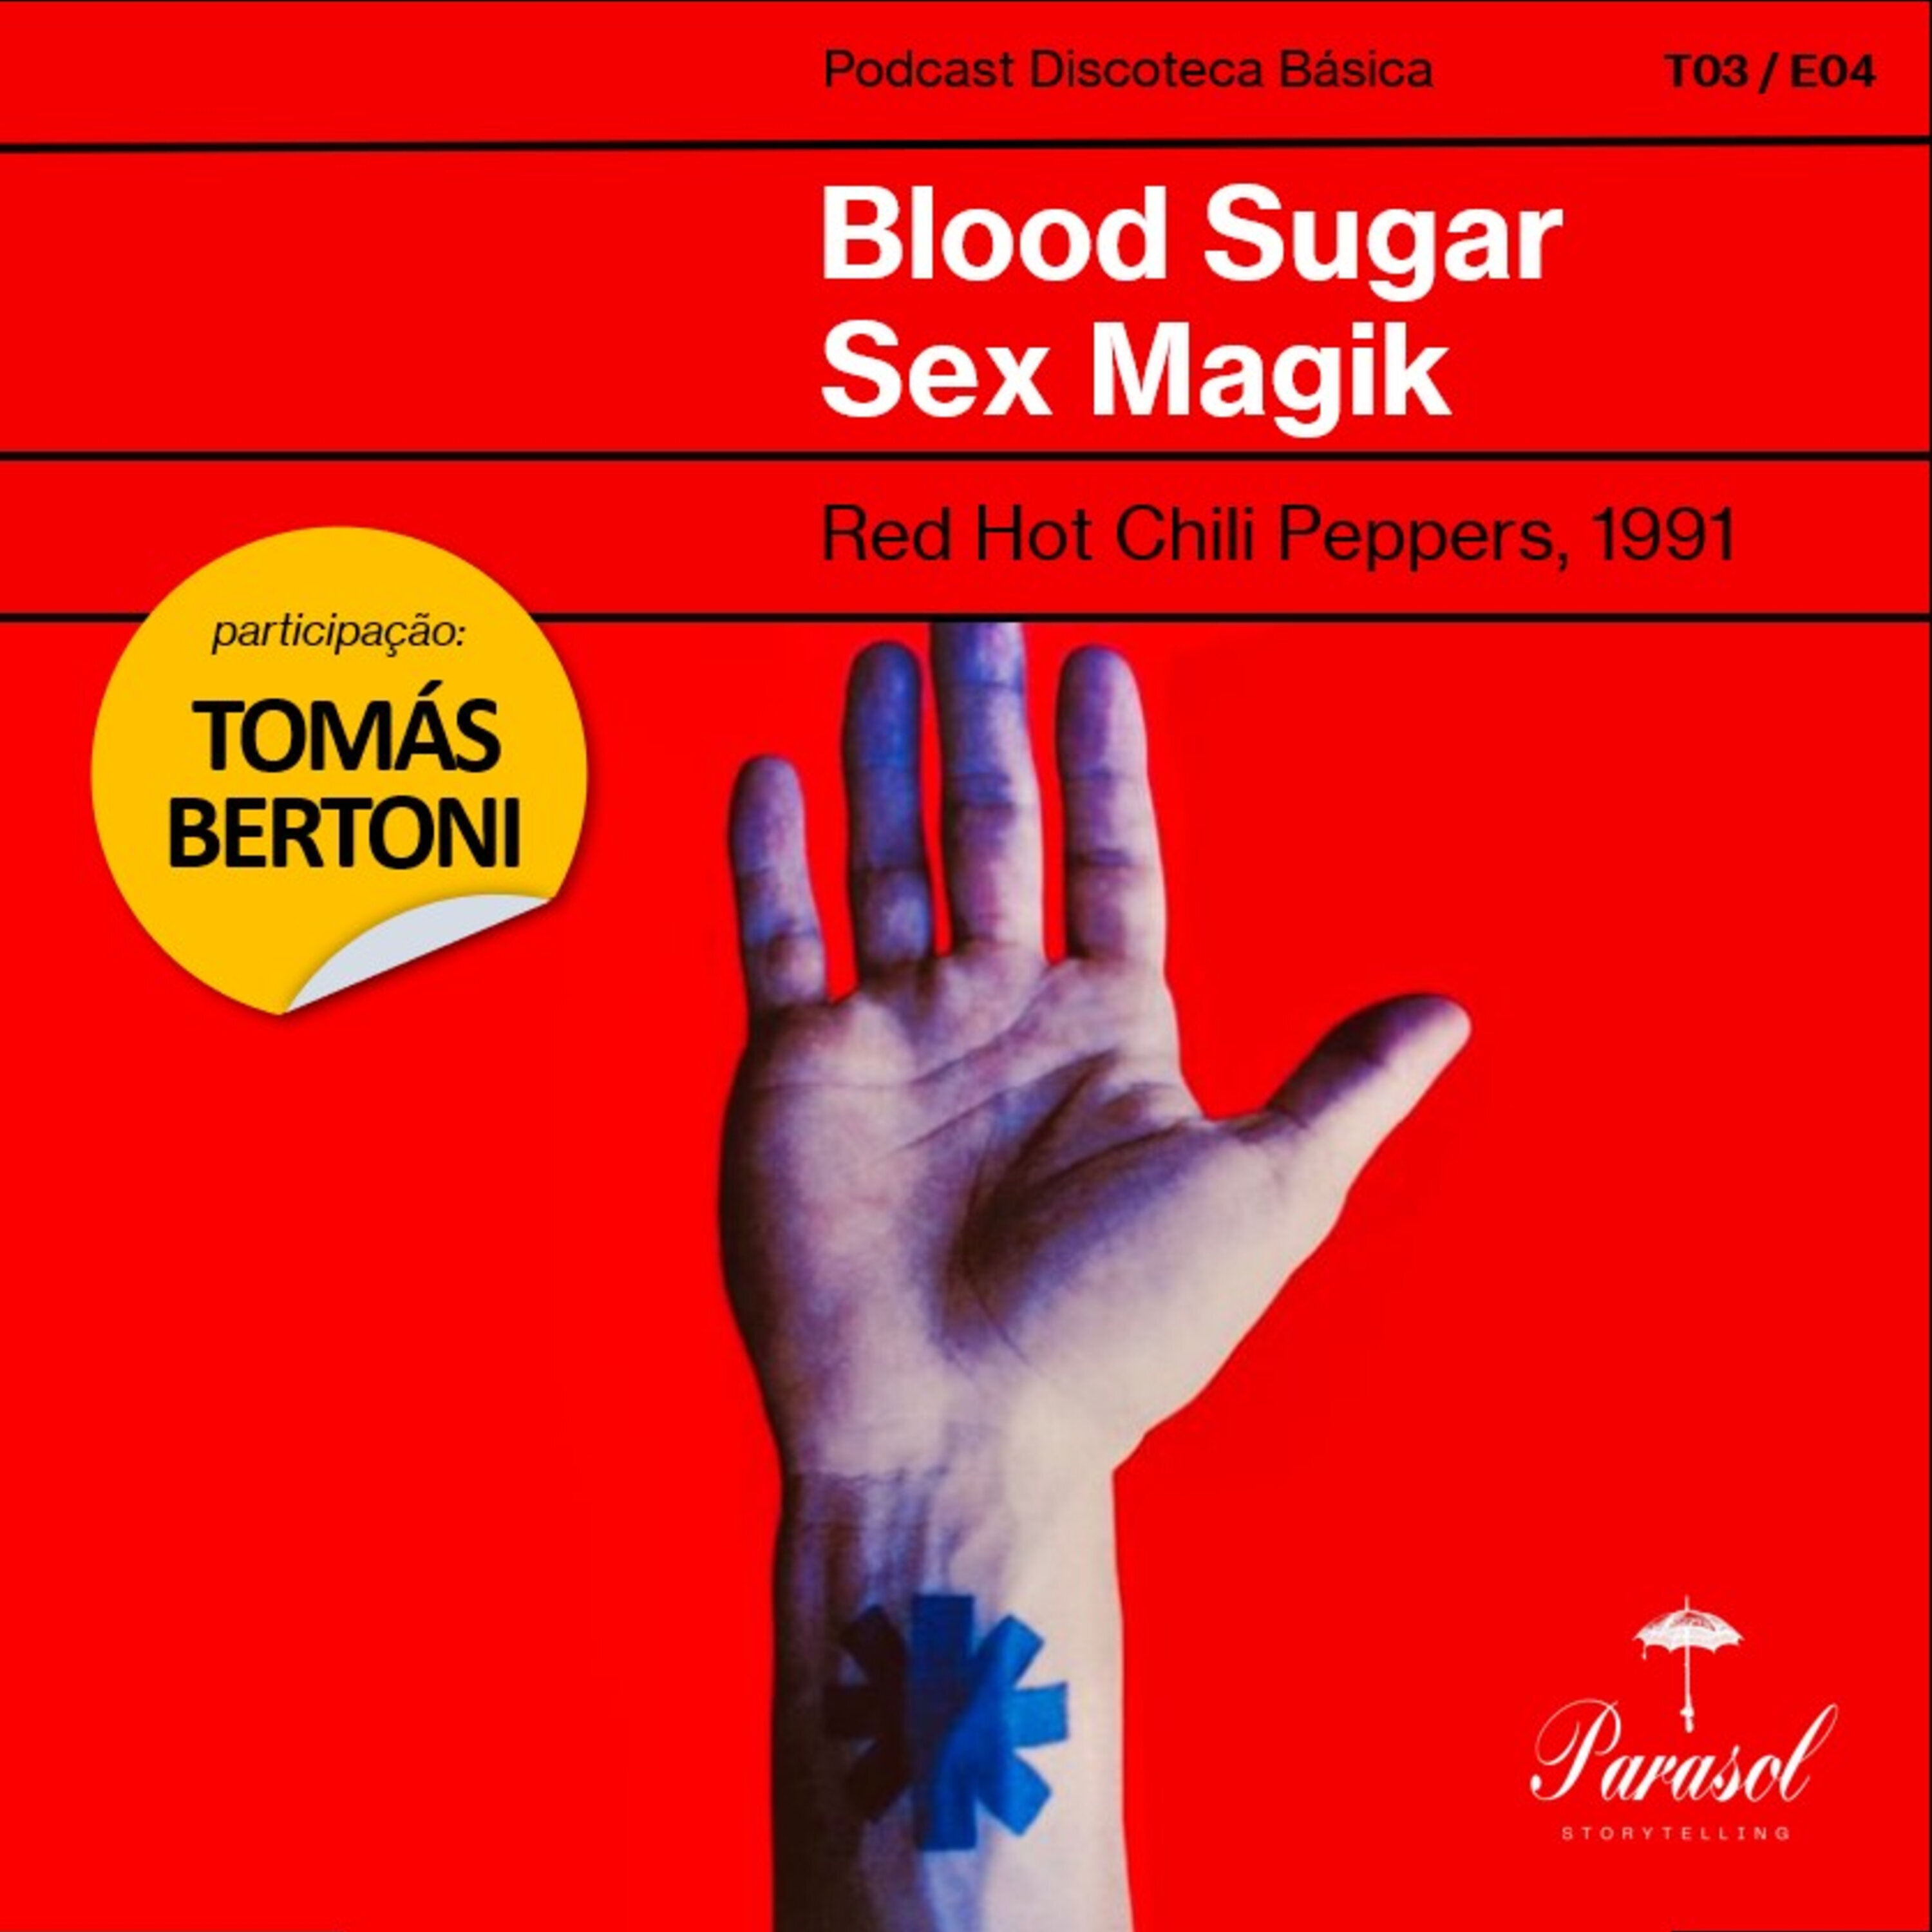 T03E04: Blood Sugar Sex Magik - Red Hot Chili Peppers (1991)